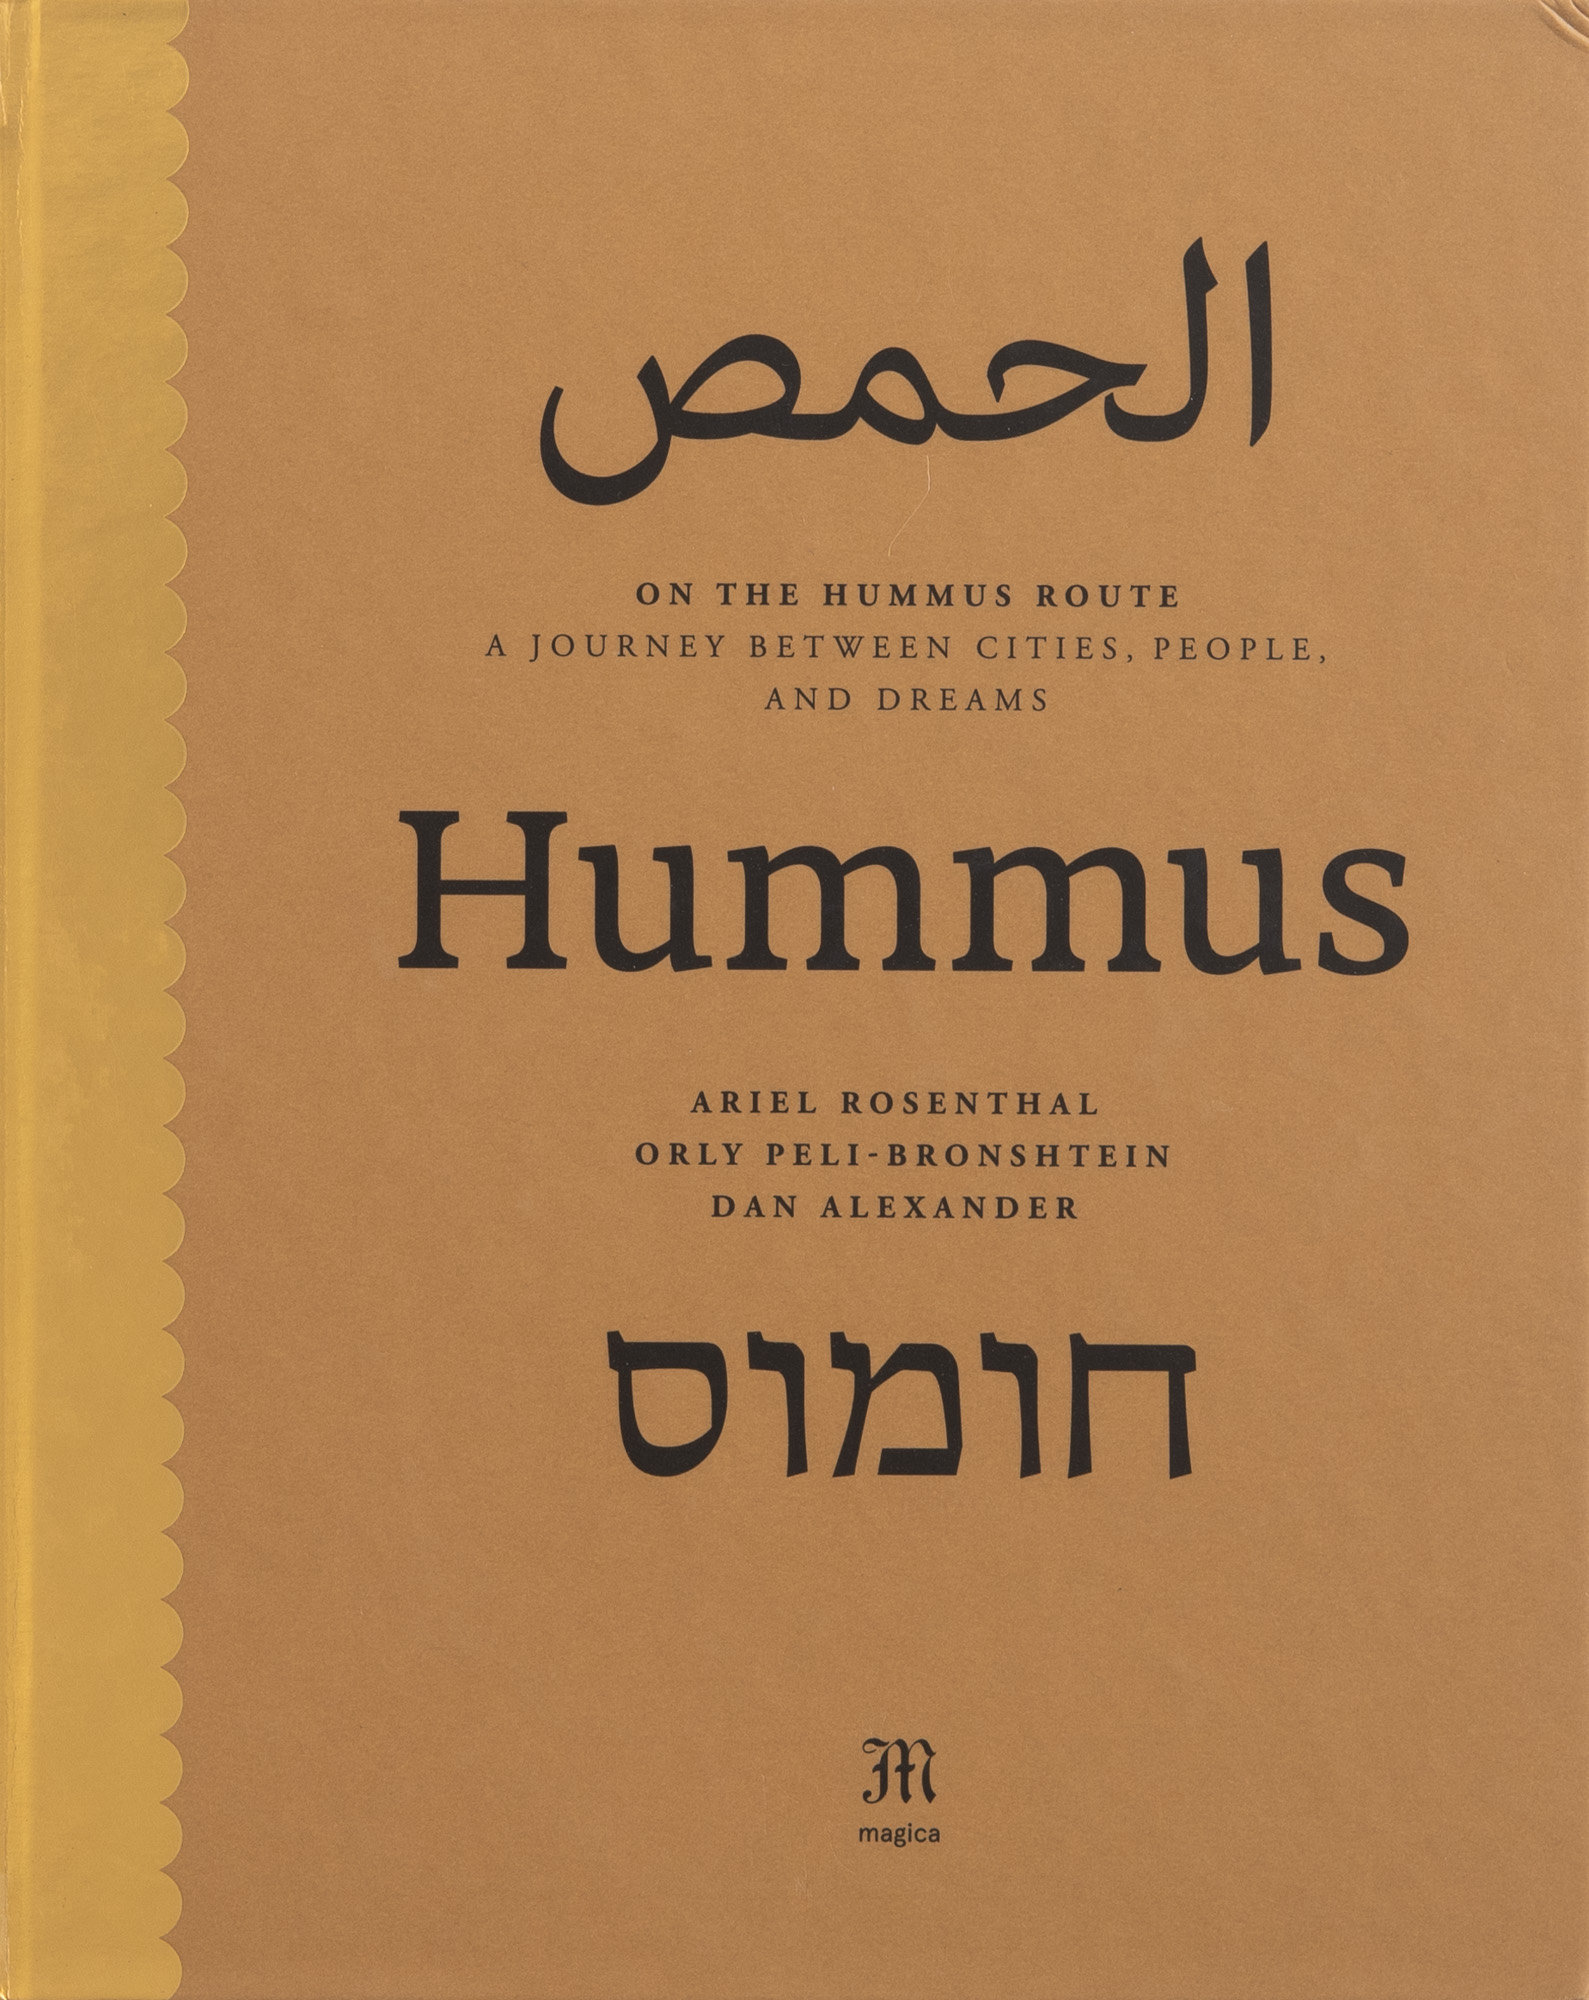 The Cover of the cookbook On The Hummus Route